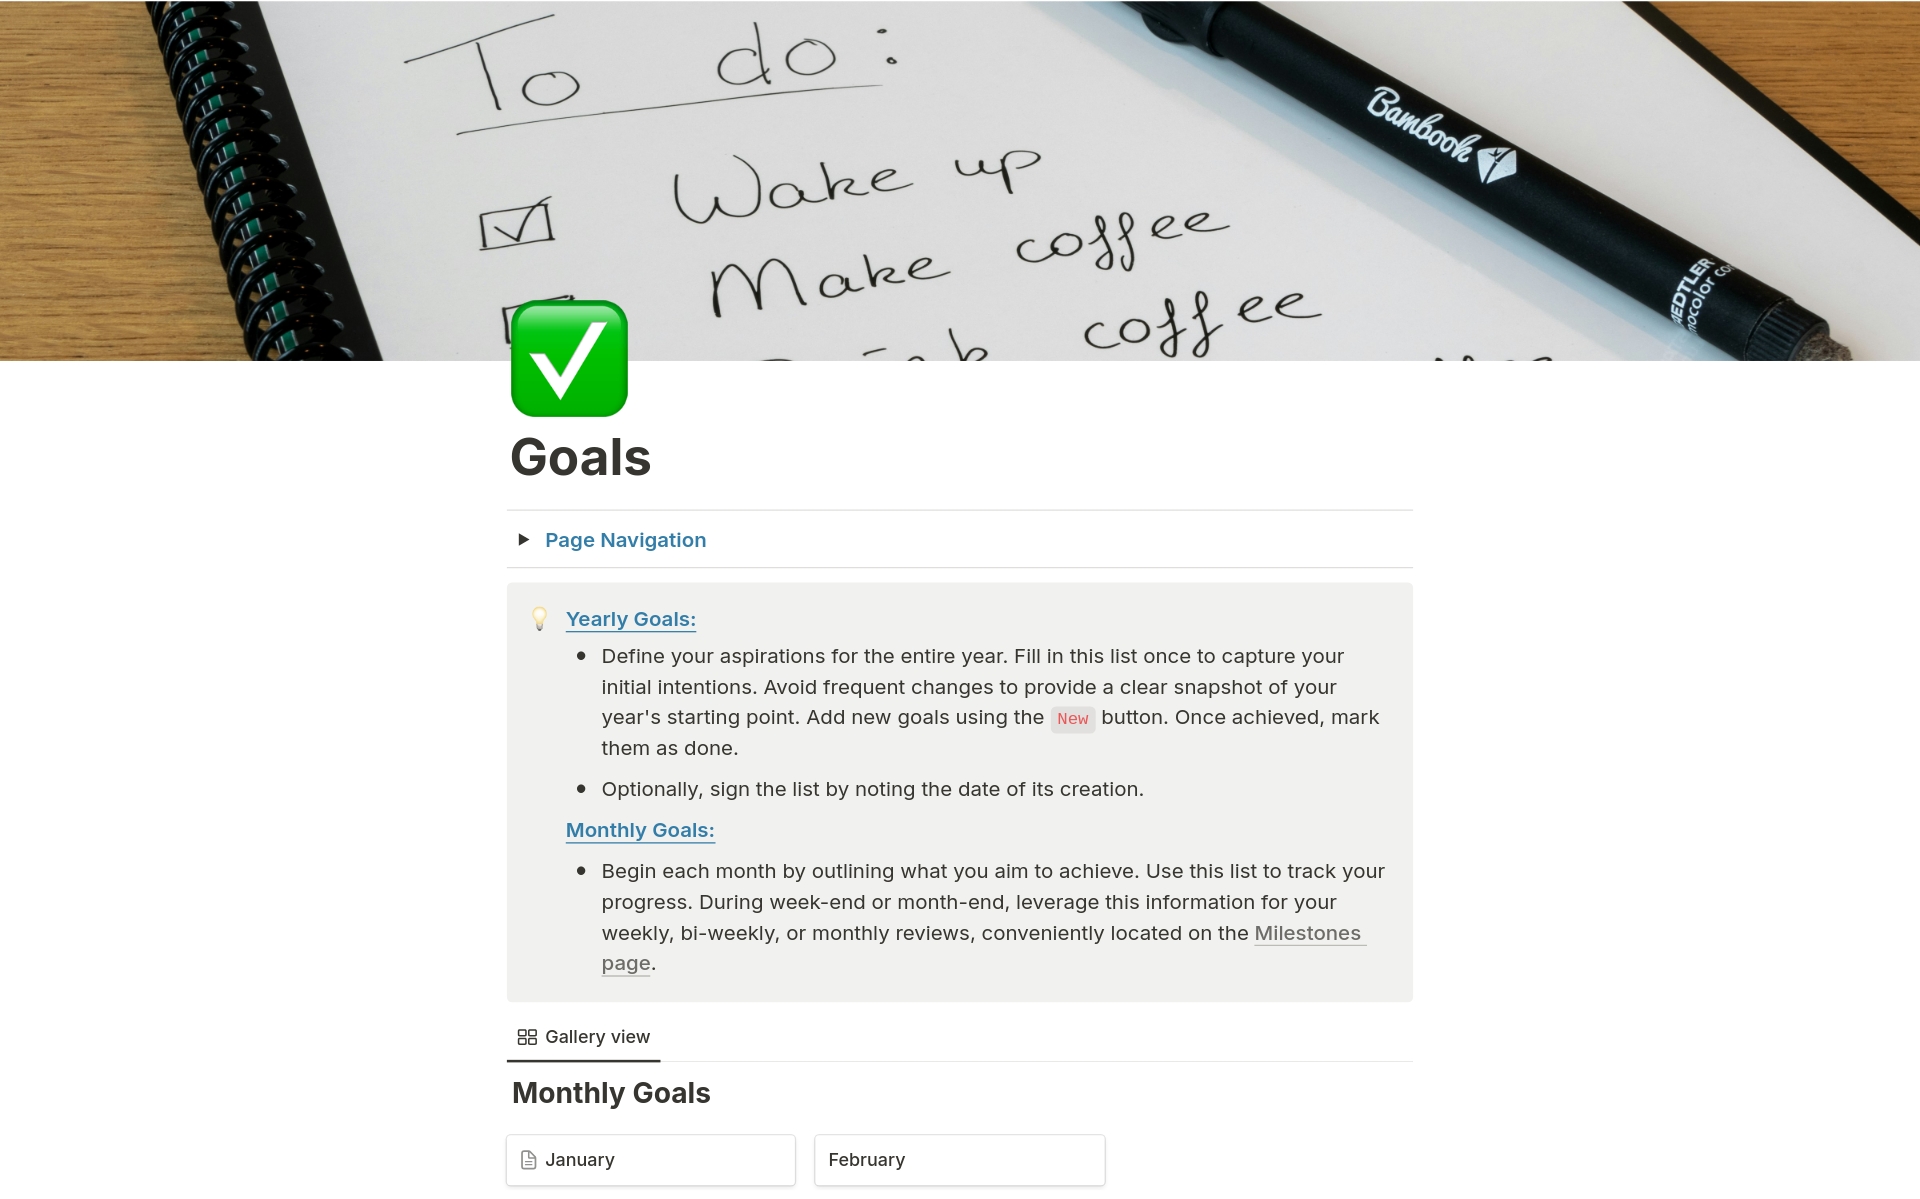 Make this year the best year of your life! This Yearly Goals and Progress Tracker helps you track your achievements.